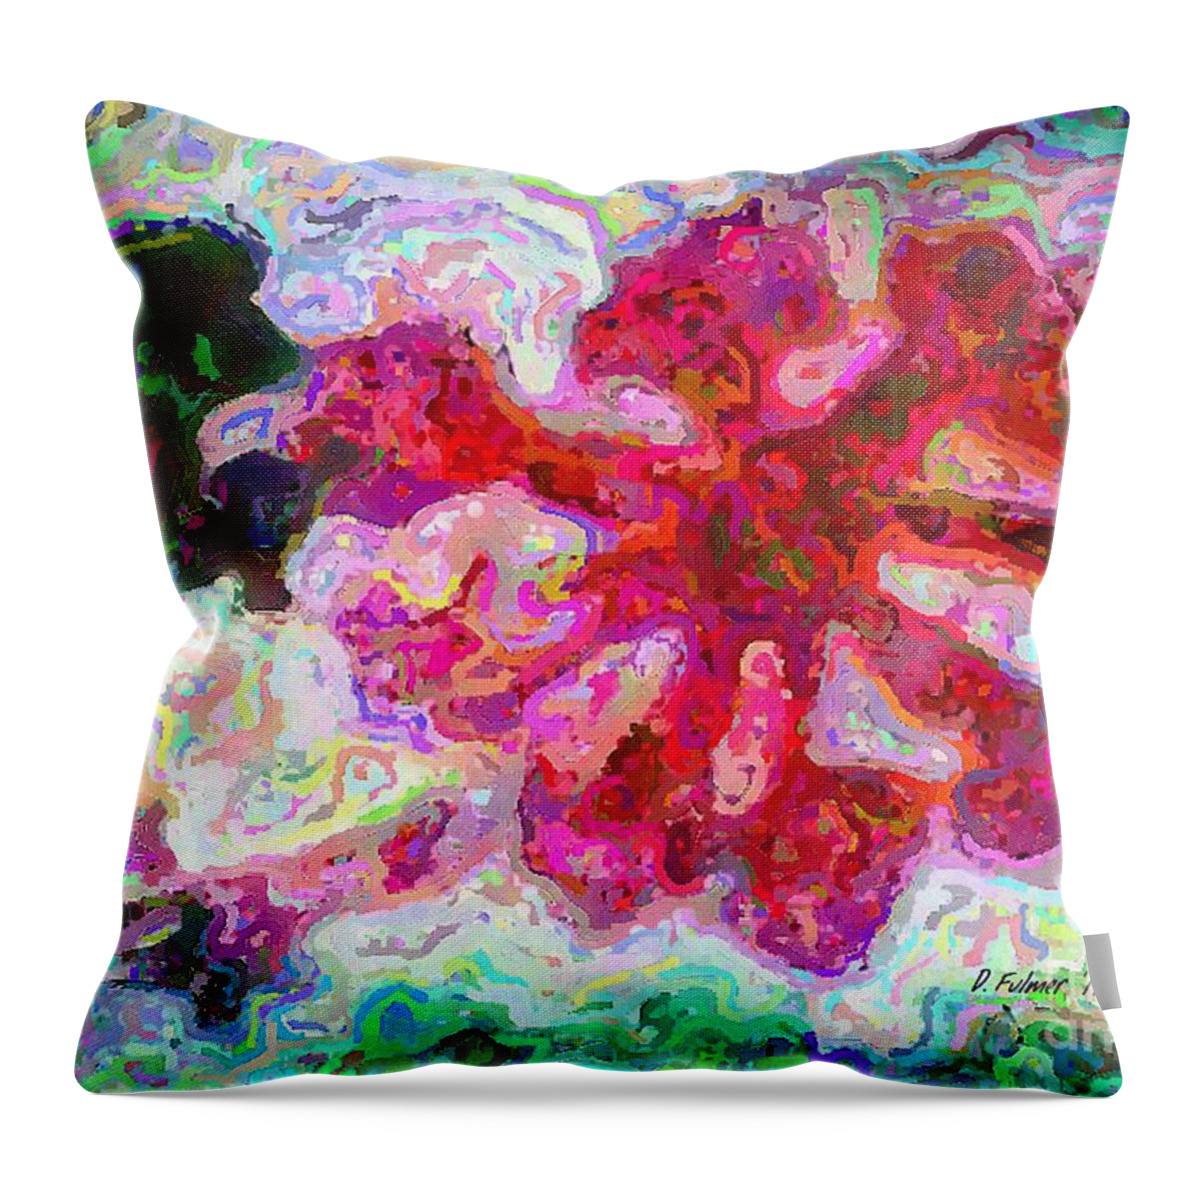 Abstract Throw Pillow featuring the mixed media Design Lefleur by Denise F Fulmer